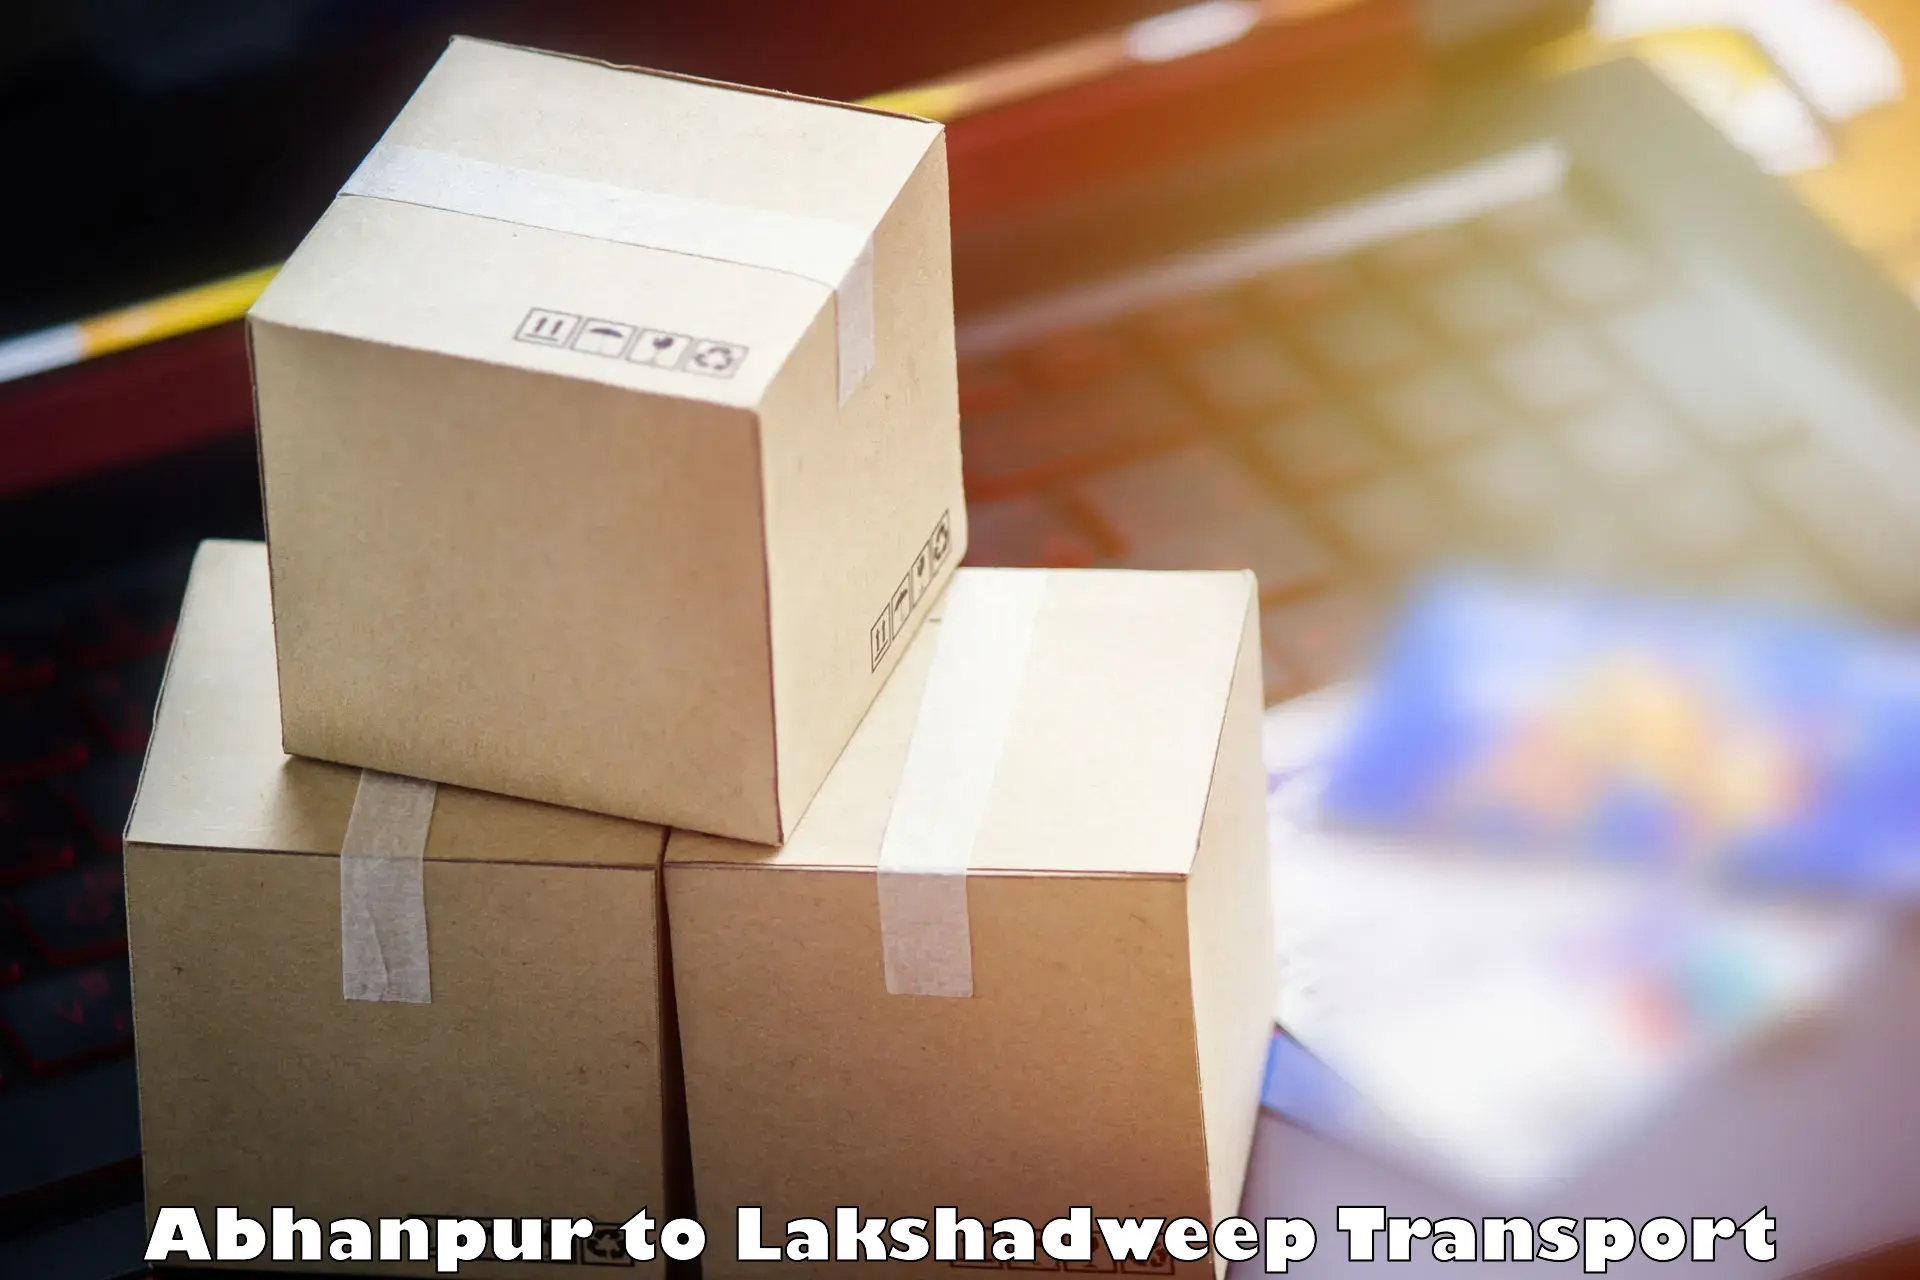 Vehicle transport services Abhanpur to Lakshadweep